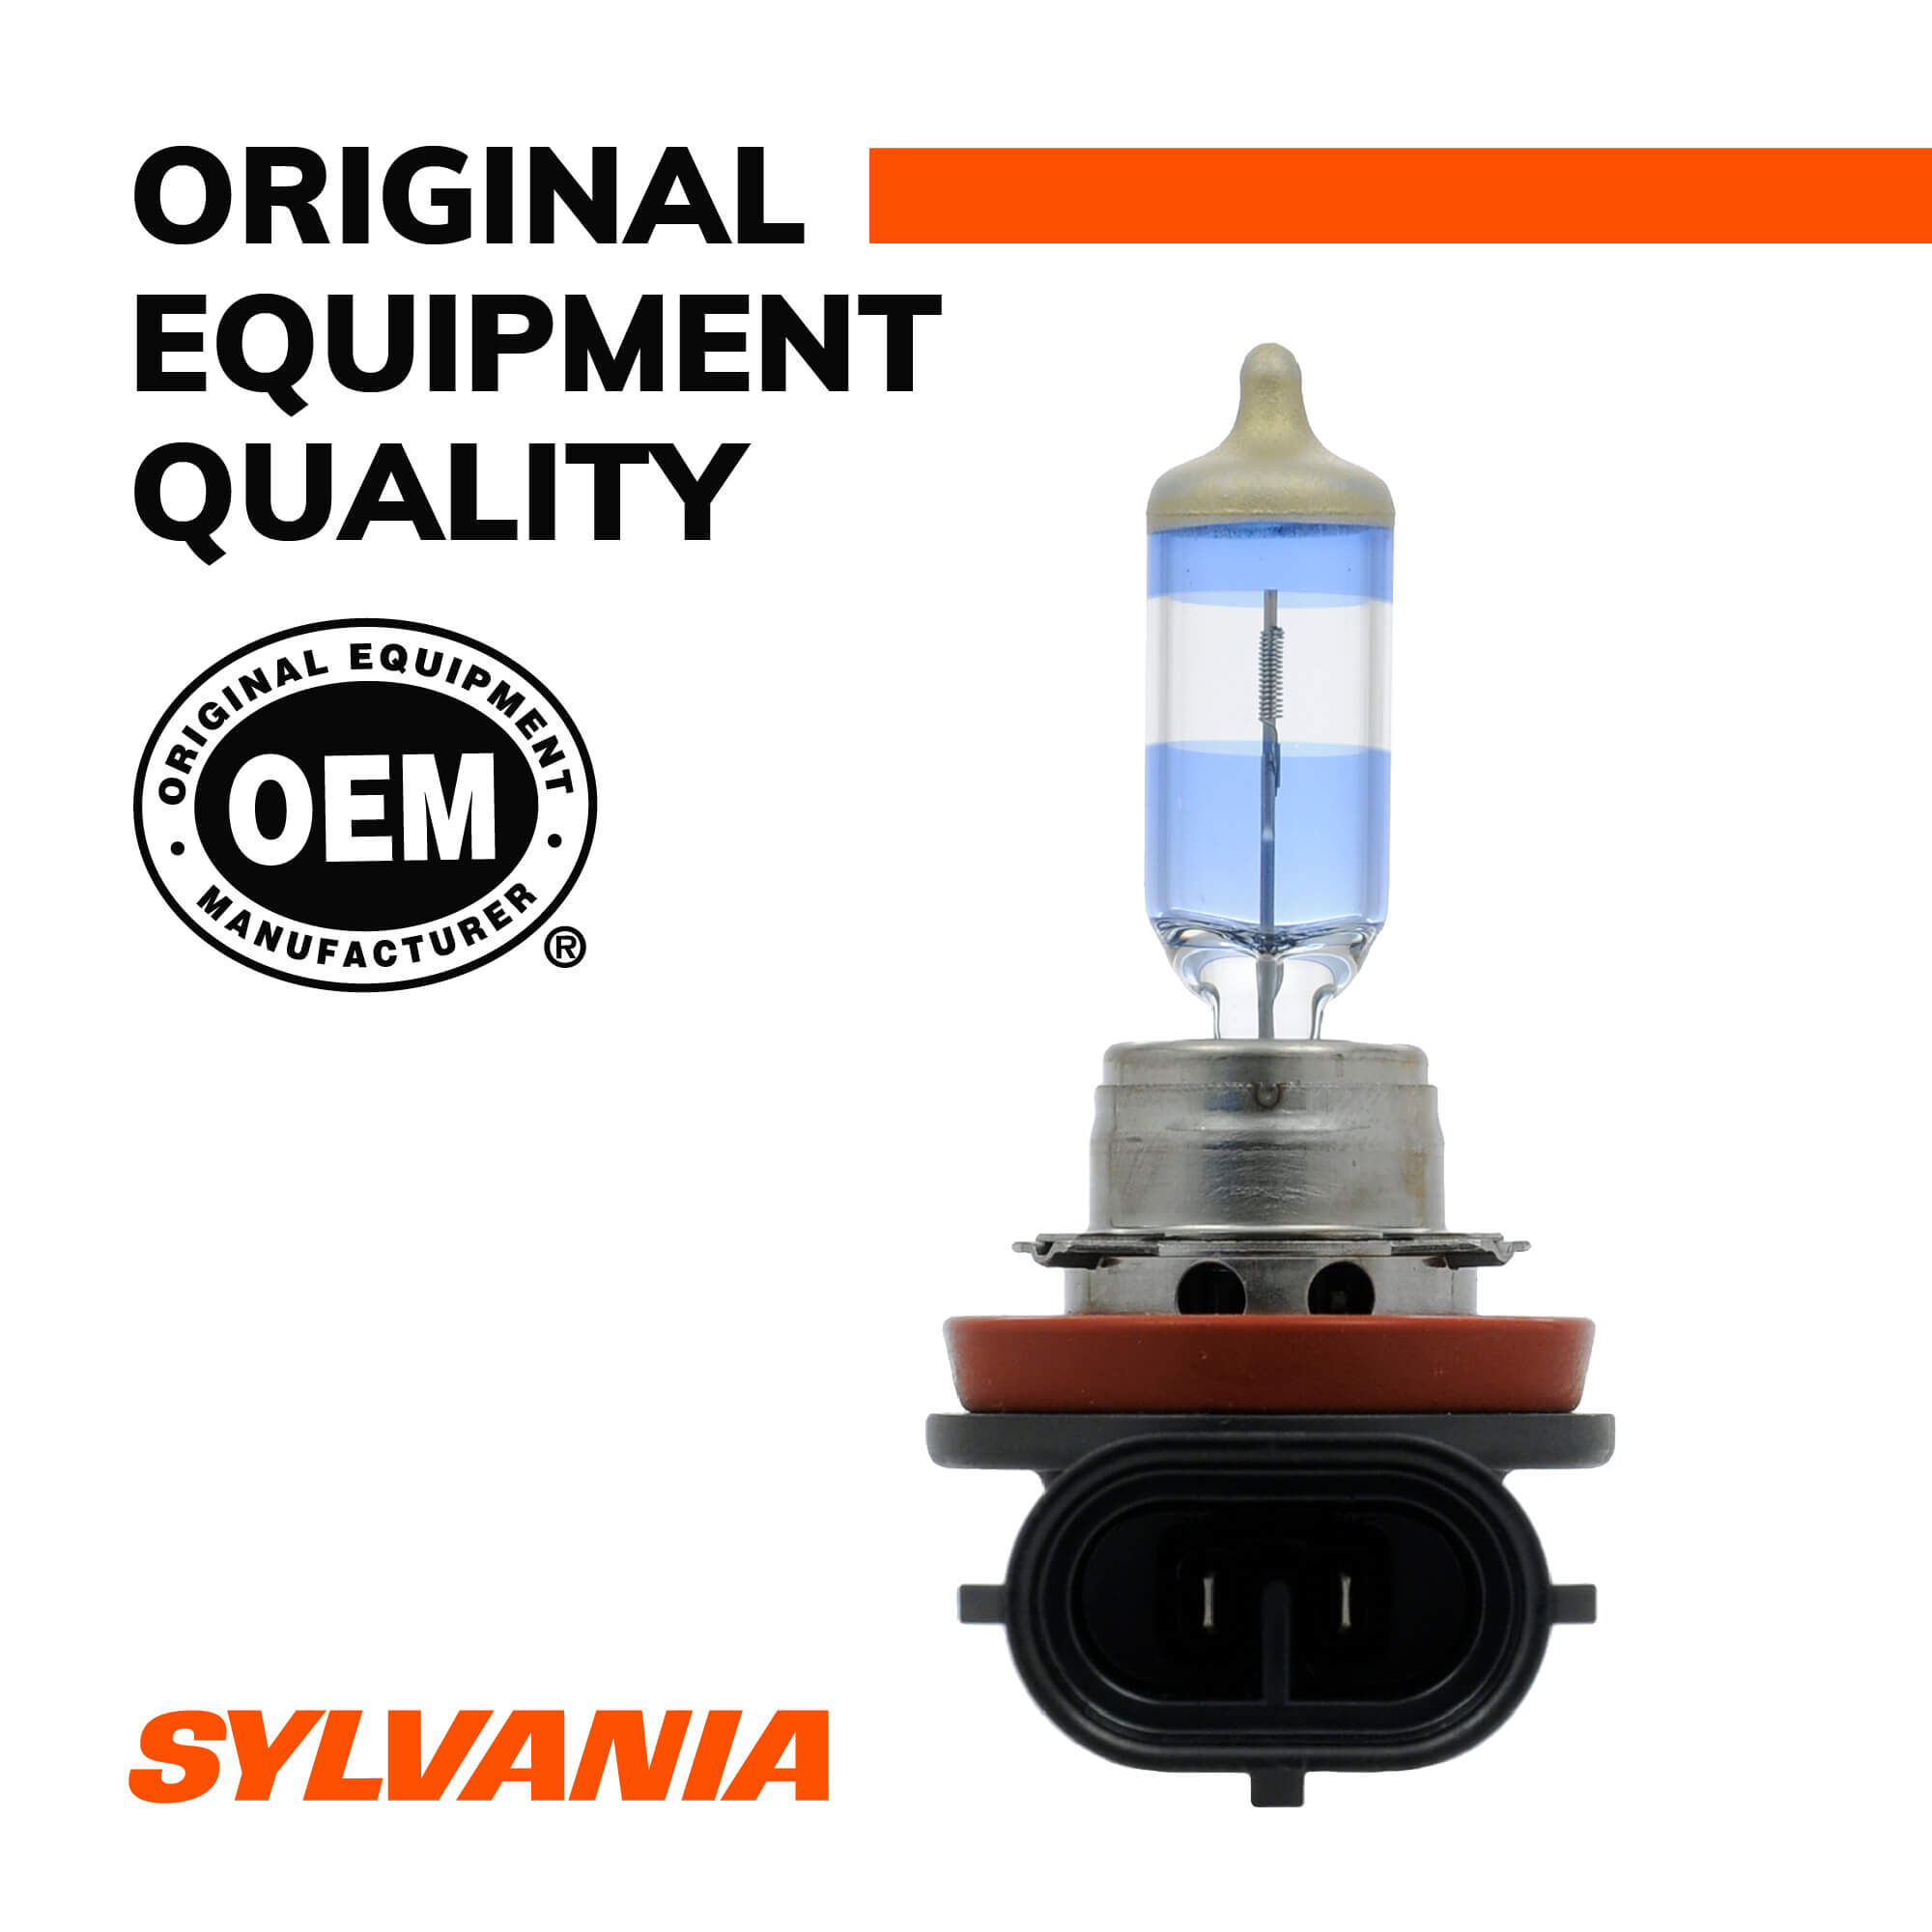 SYLVANIA H1 SilverStar Brighter Downroad with Whiter Light Low Beam and Fog Replacement Bulb High Performance Halogen Headlight Bulb High Beam Contains 2 Bulbs 